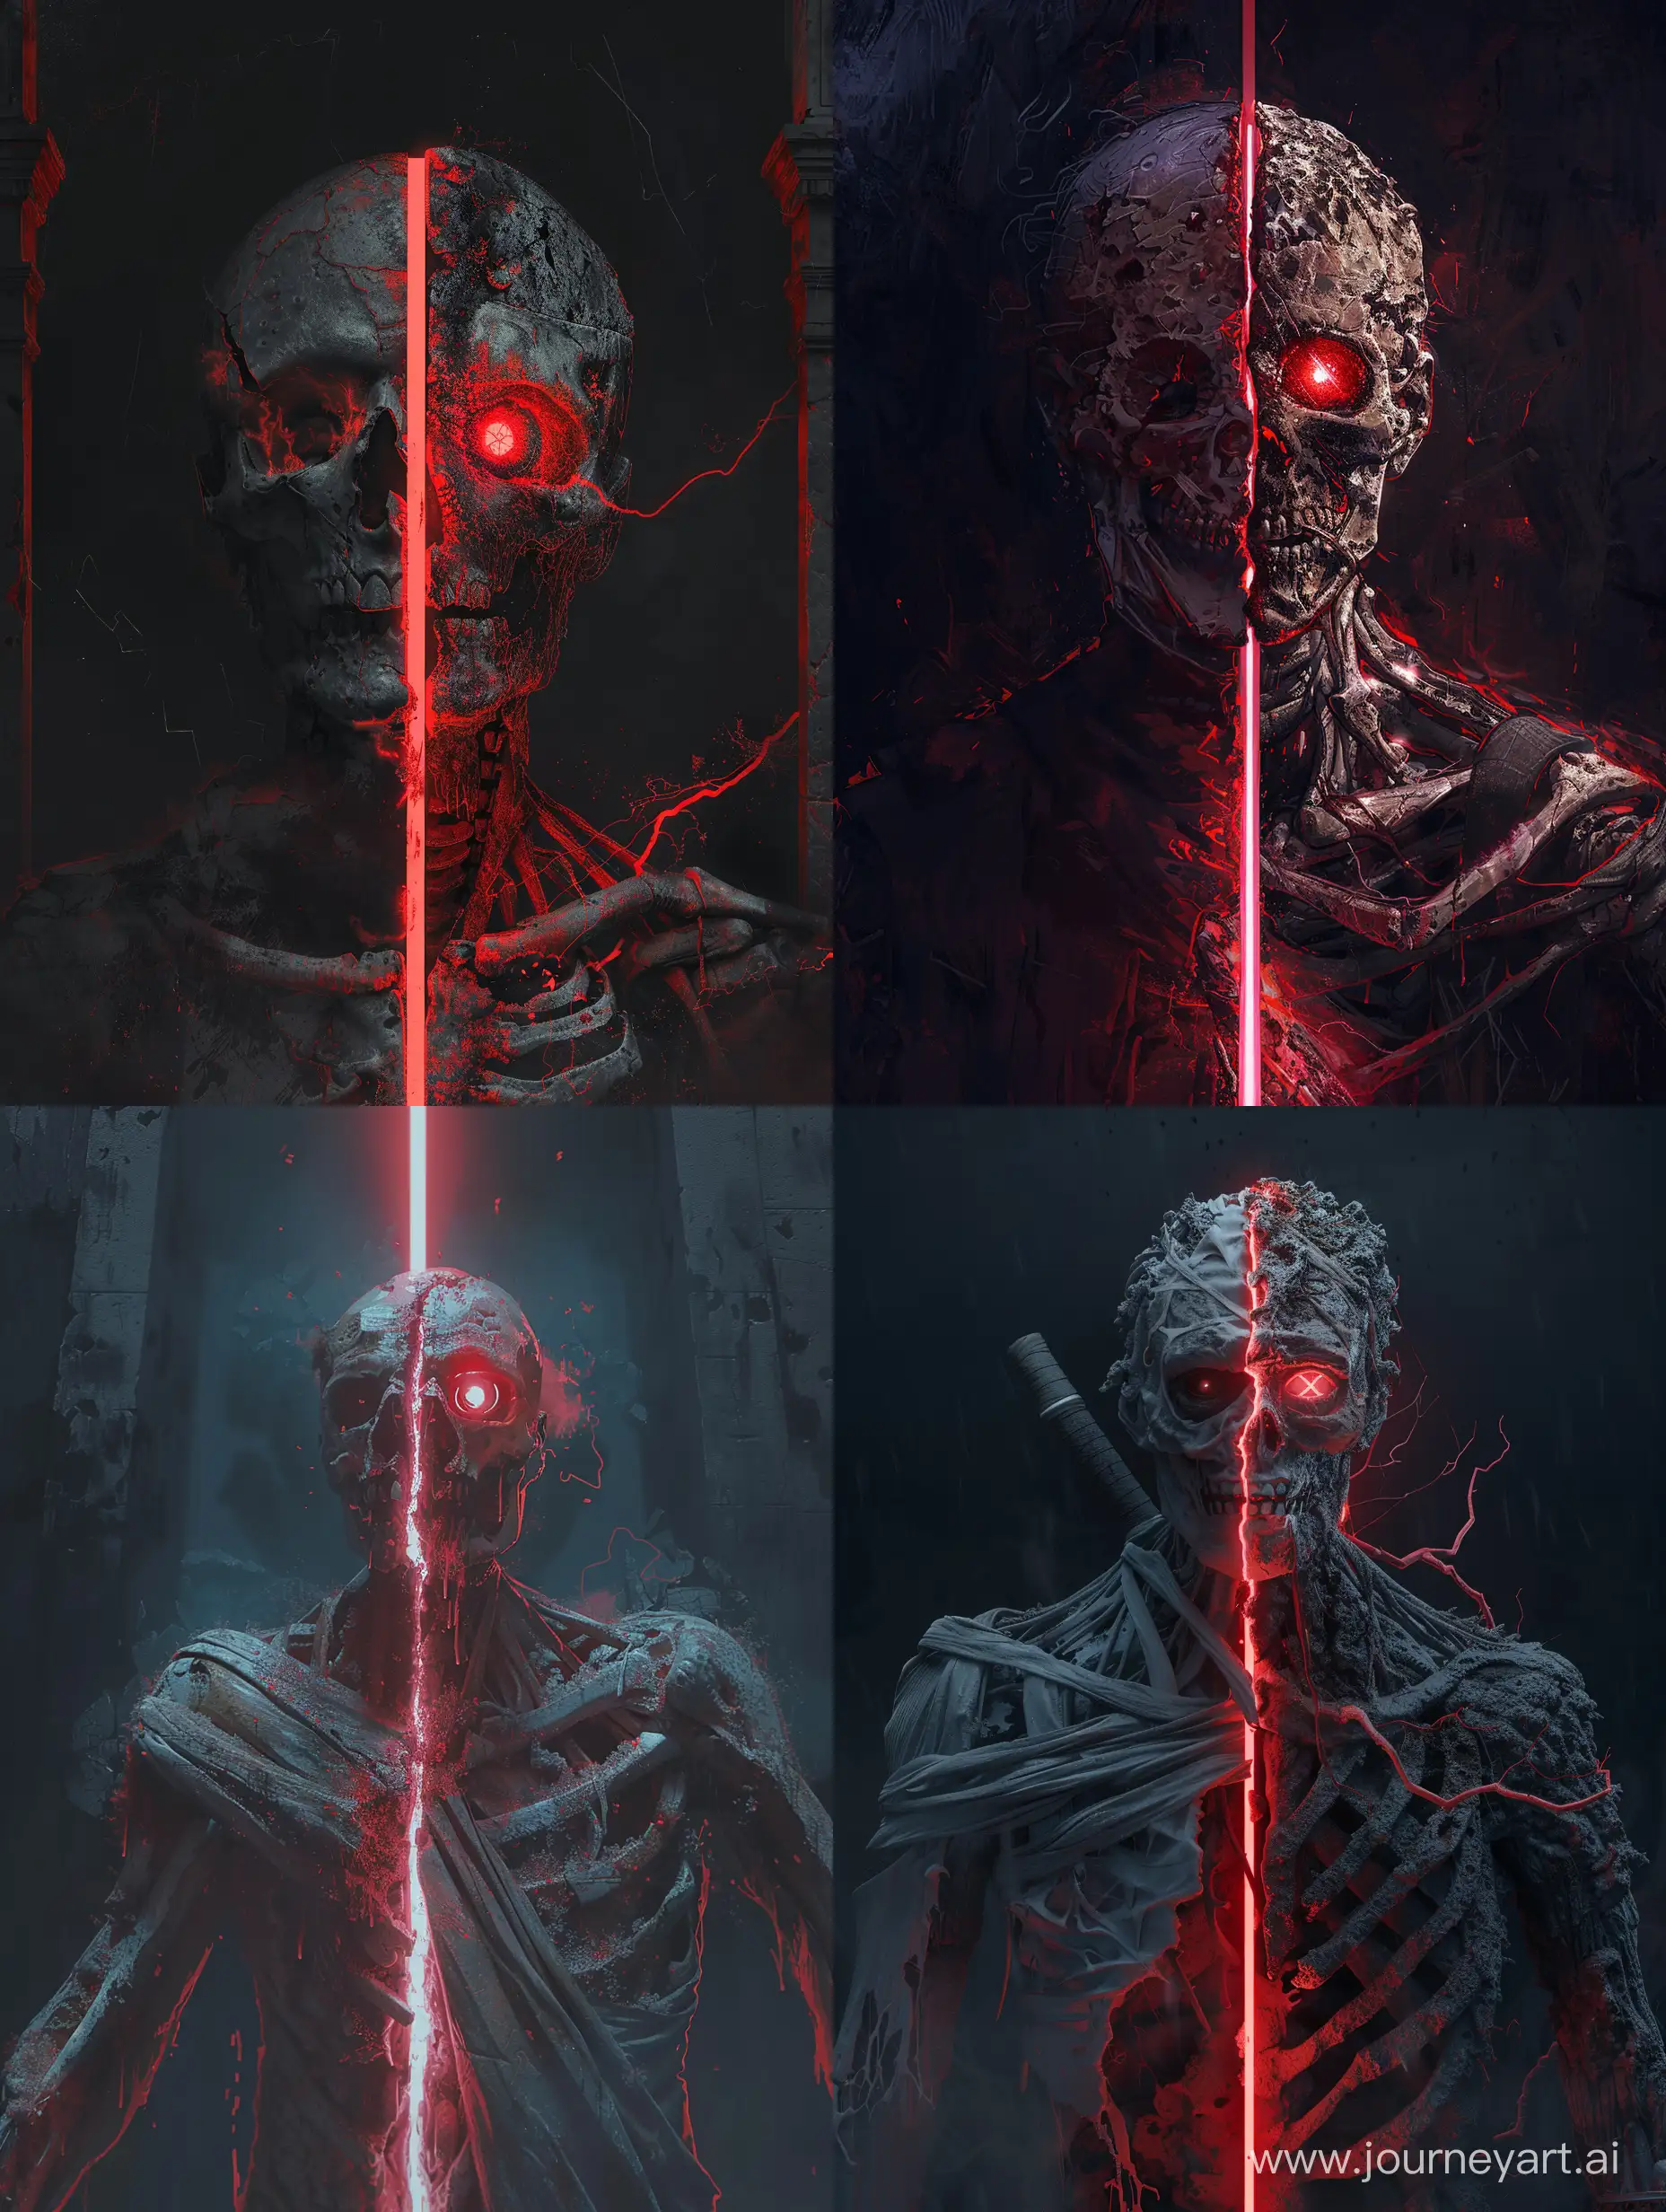 The deadly, immortal guardian of the necropolis is tirelessly vigilant in guarding the citadel, destroying anyone who dares venture so far from the world of the living. He is composed of the substance of decayed remains, split in half, his eyes glowing with a blood-red neon light in the darkness. 